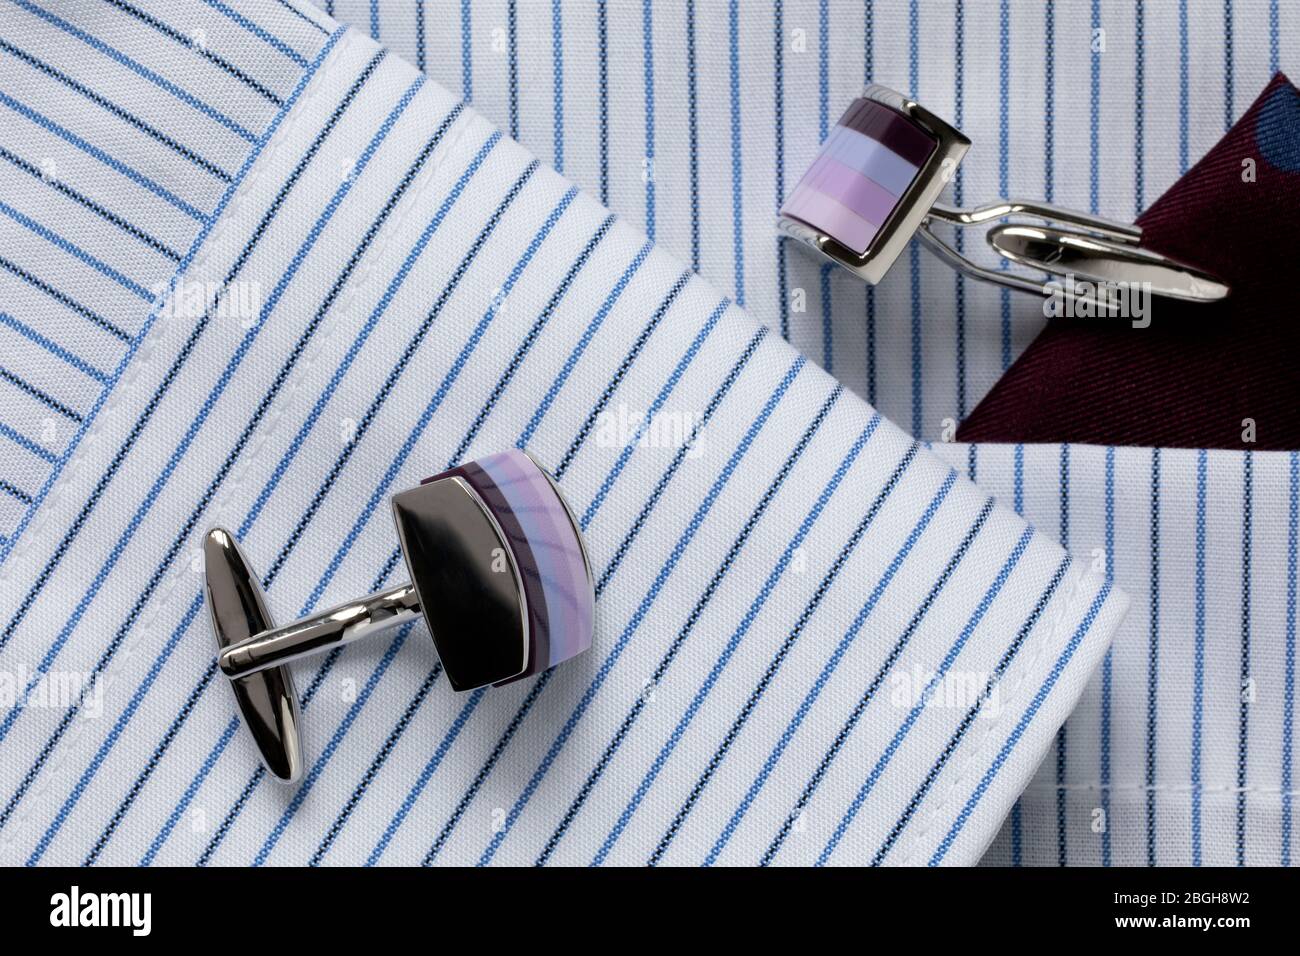 Striped white and blue men's shirt with multicolored cufflinks. Business dress code. Close-up. Selecrive focus. Stock Photo